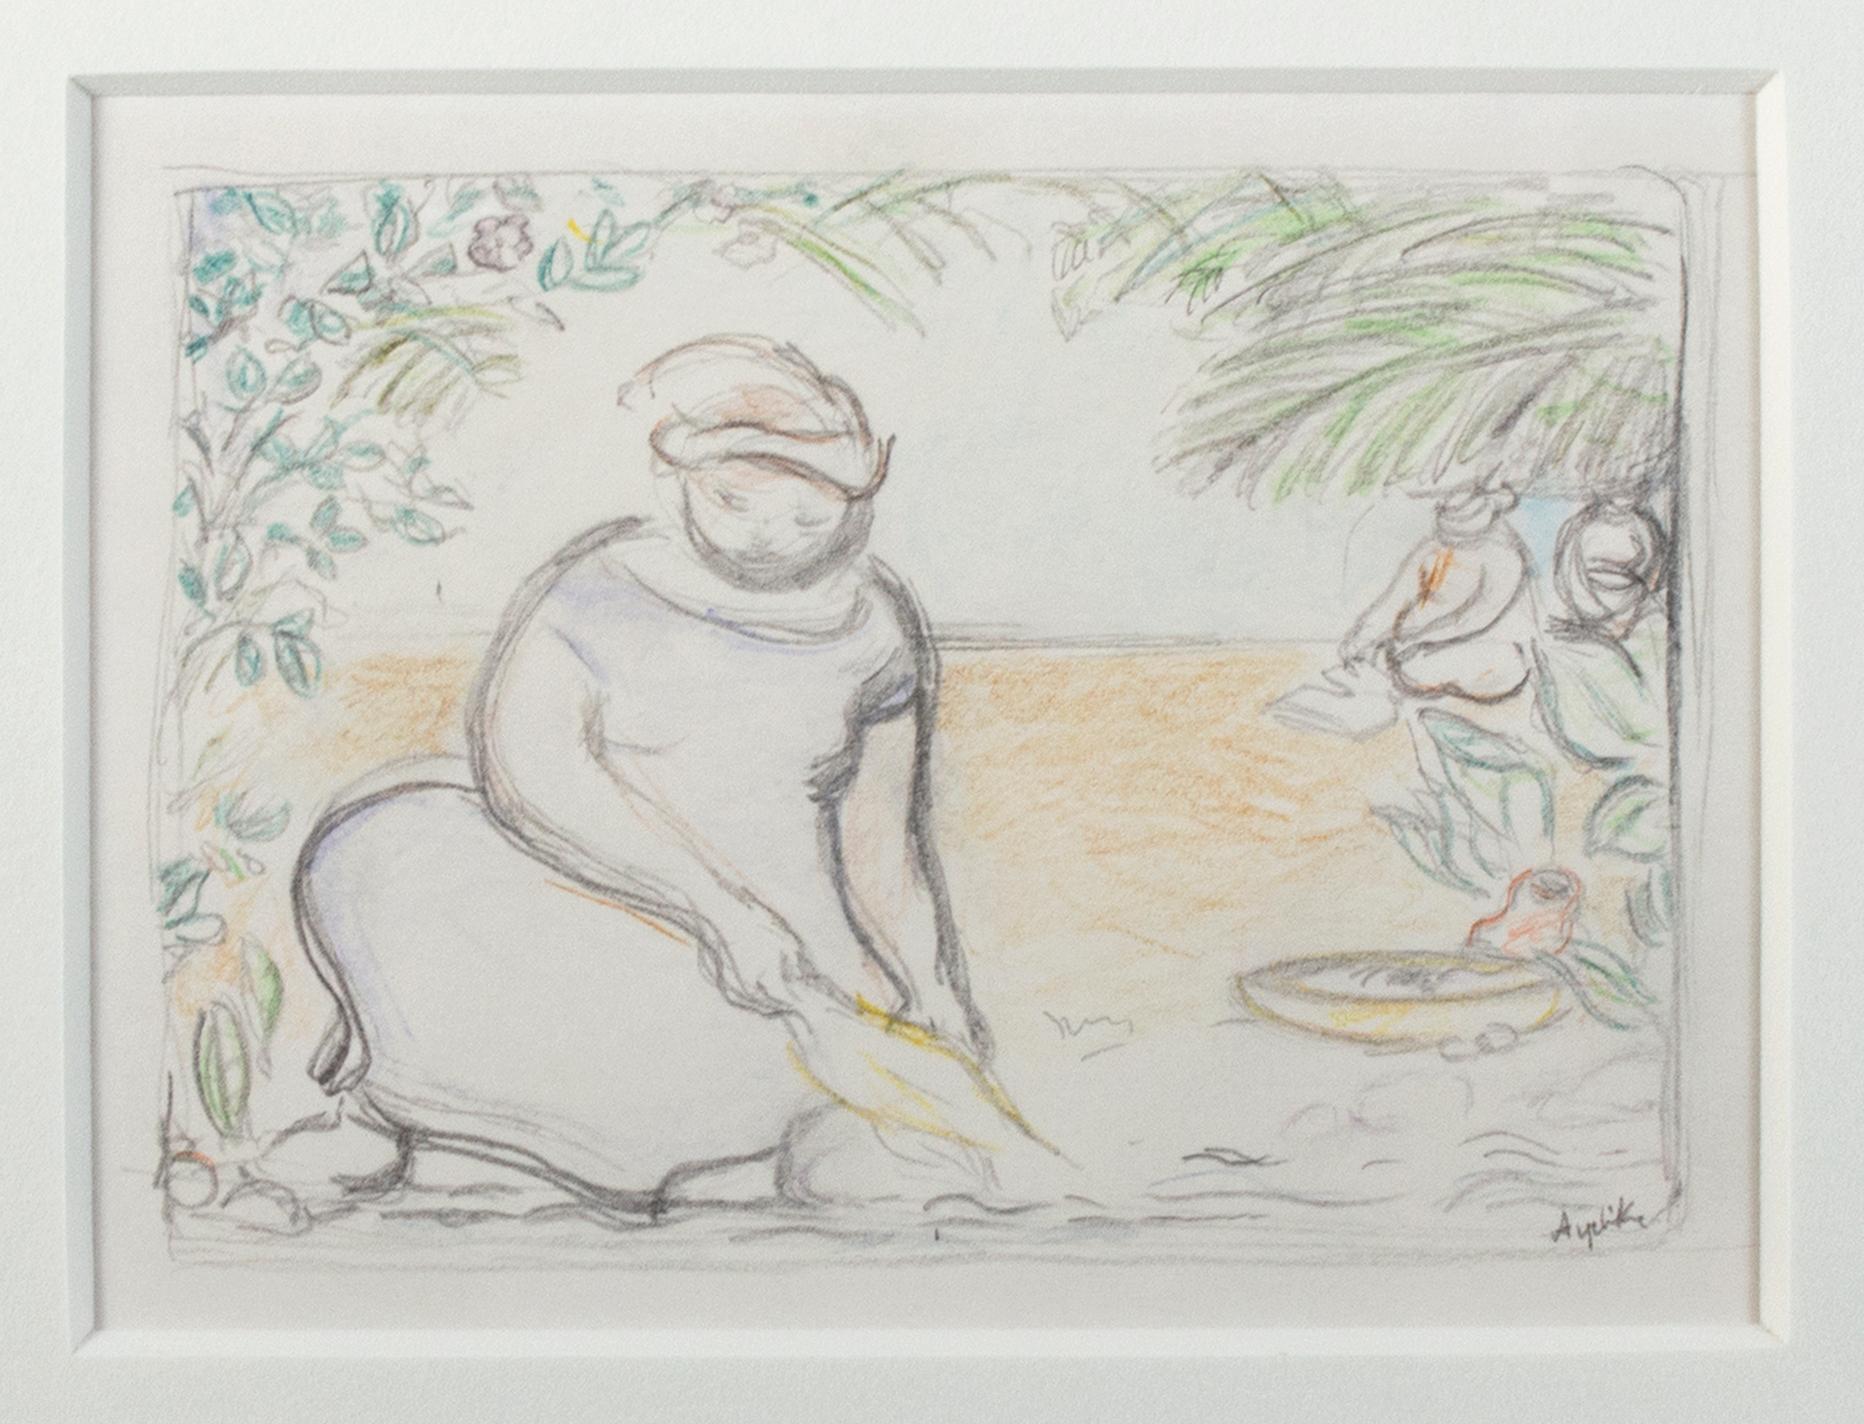 In this small, intimate drawing, Angelika Thusius presents an image of a woman kneeling on the ground before a river. Foliage bursts all around her, framing her in the oasis. In the distance, two other figures kneel, engaged in a similar task. The